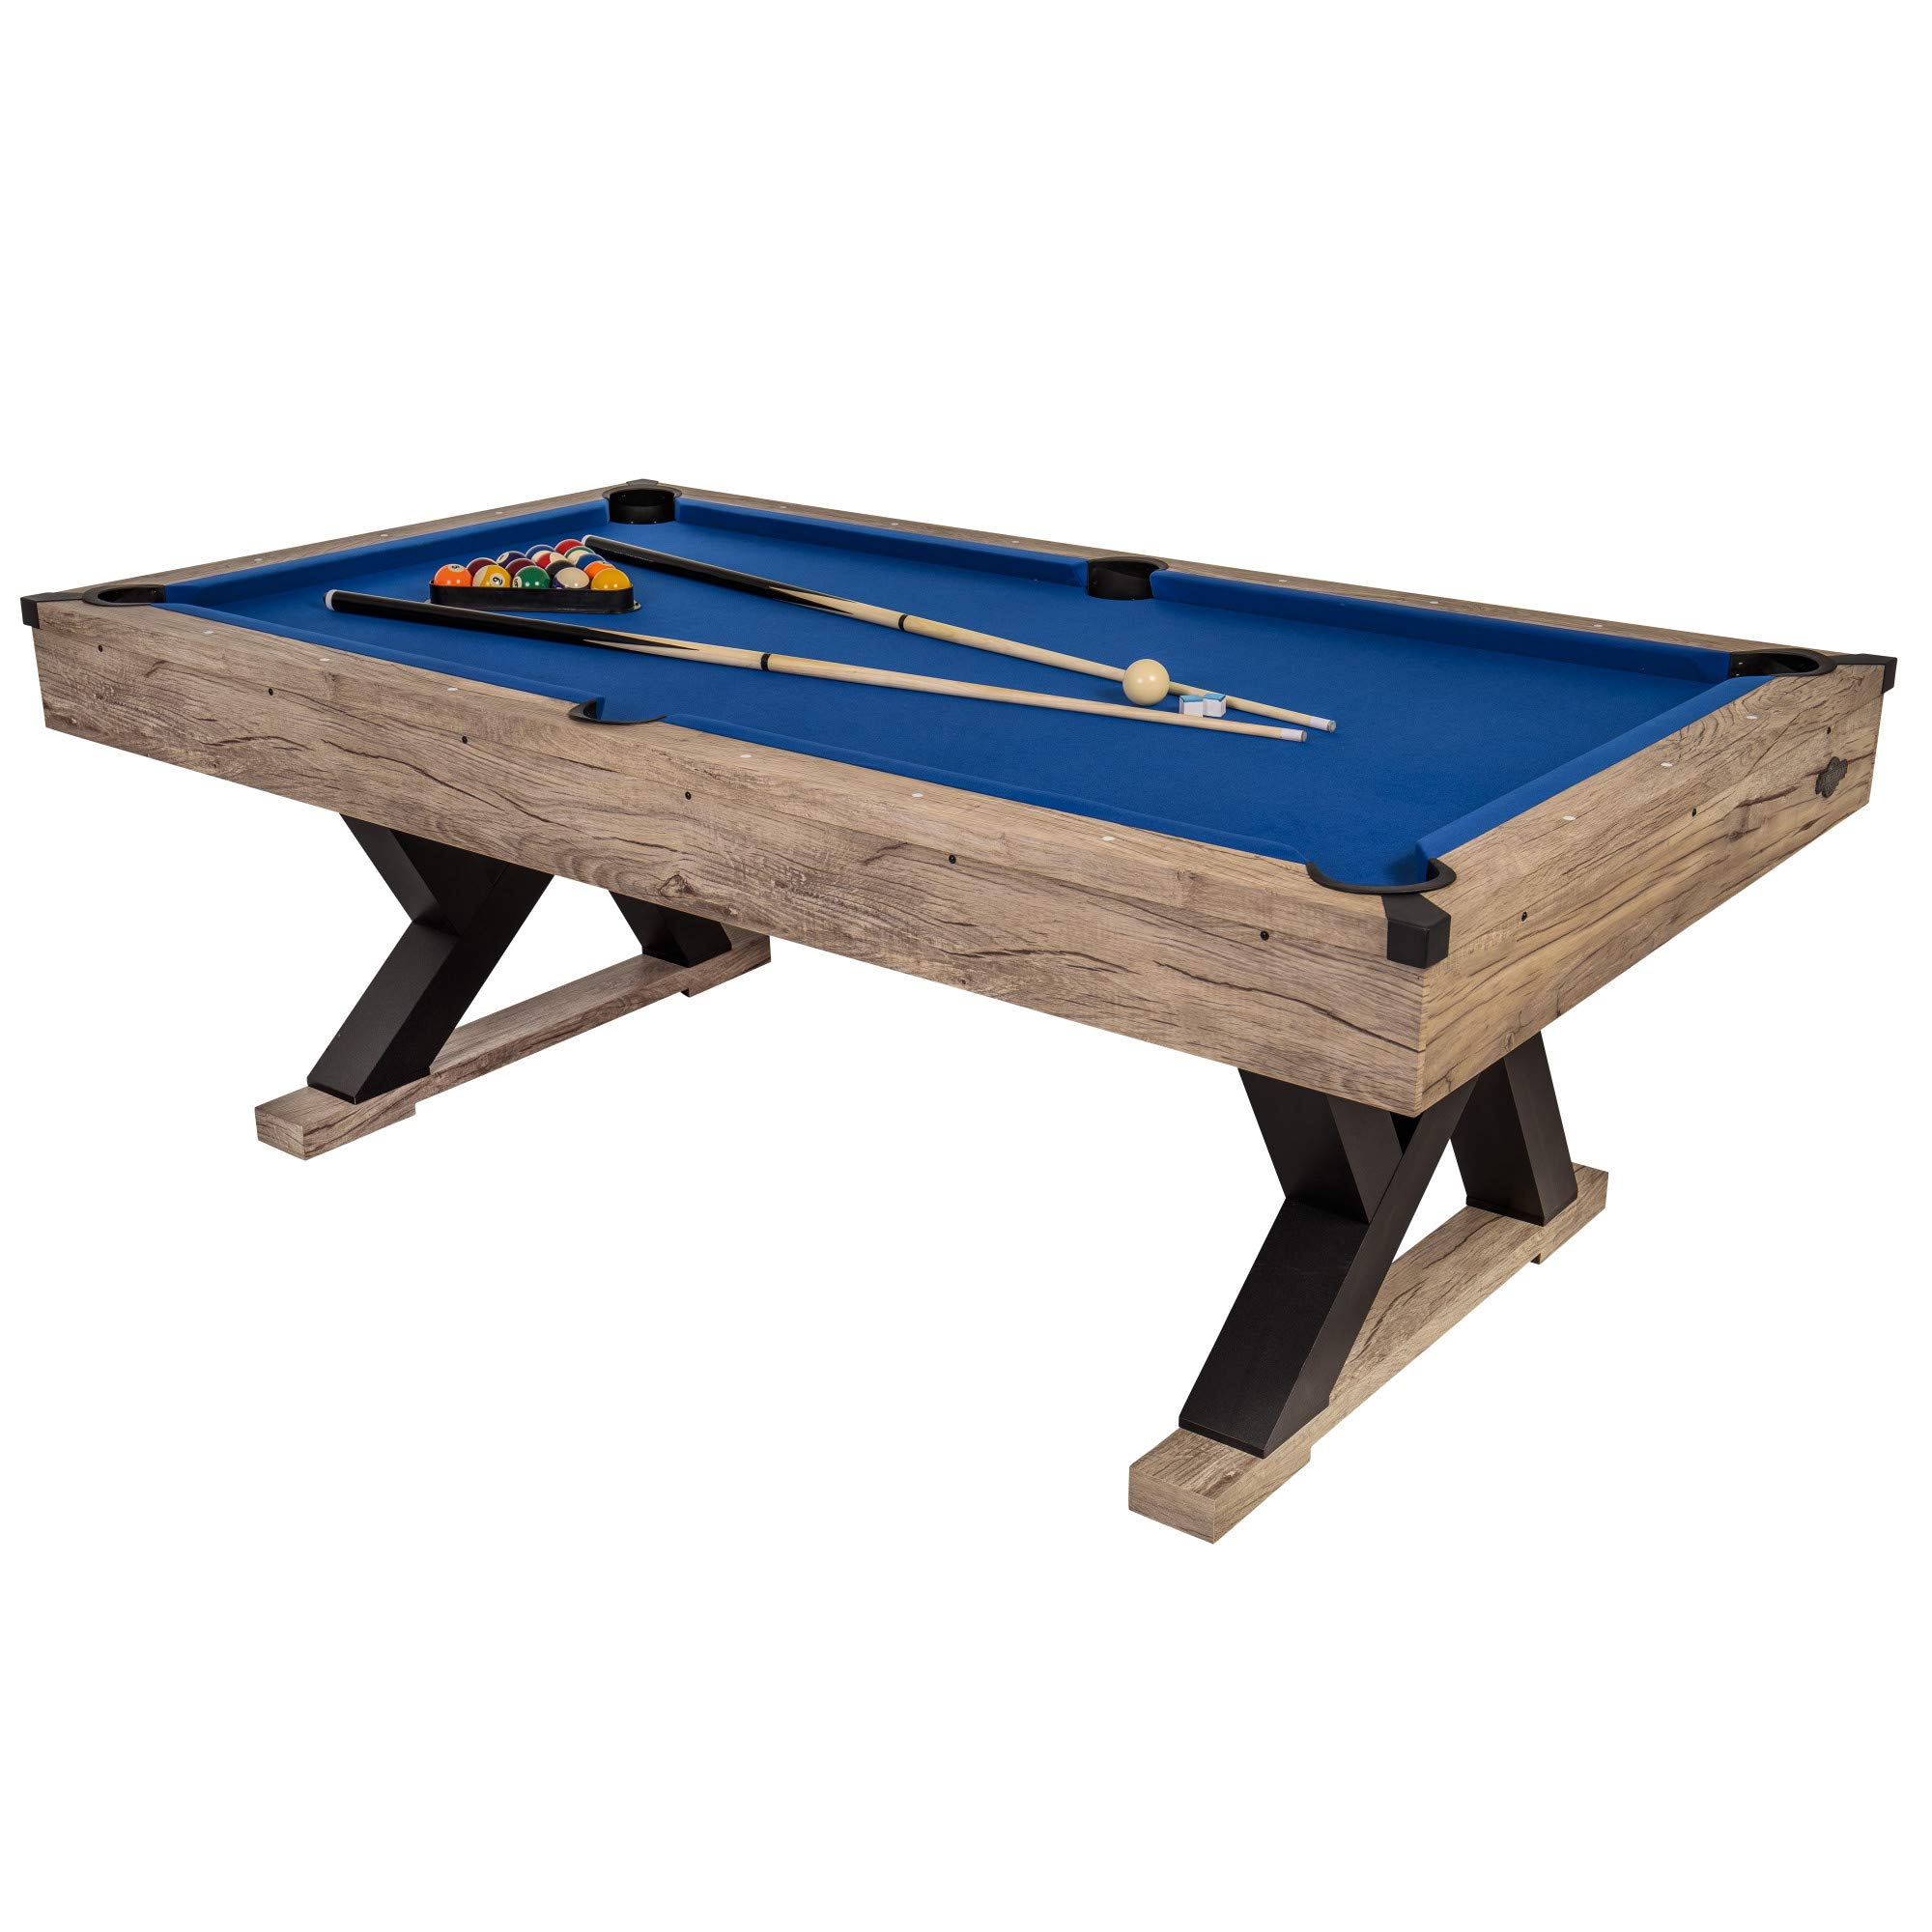 American Legend Kirkwood 84” Billiard Table with Rustic Blond Finish, K-Shaped Legs and Royal Blue Cloth